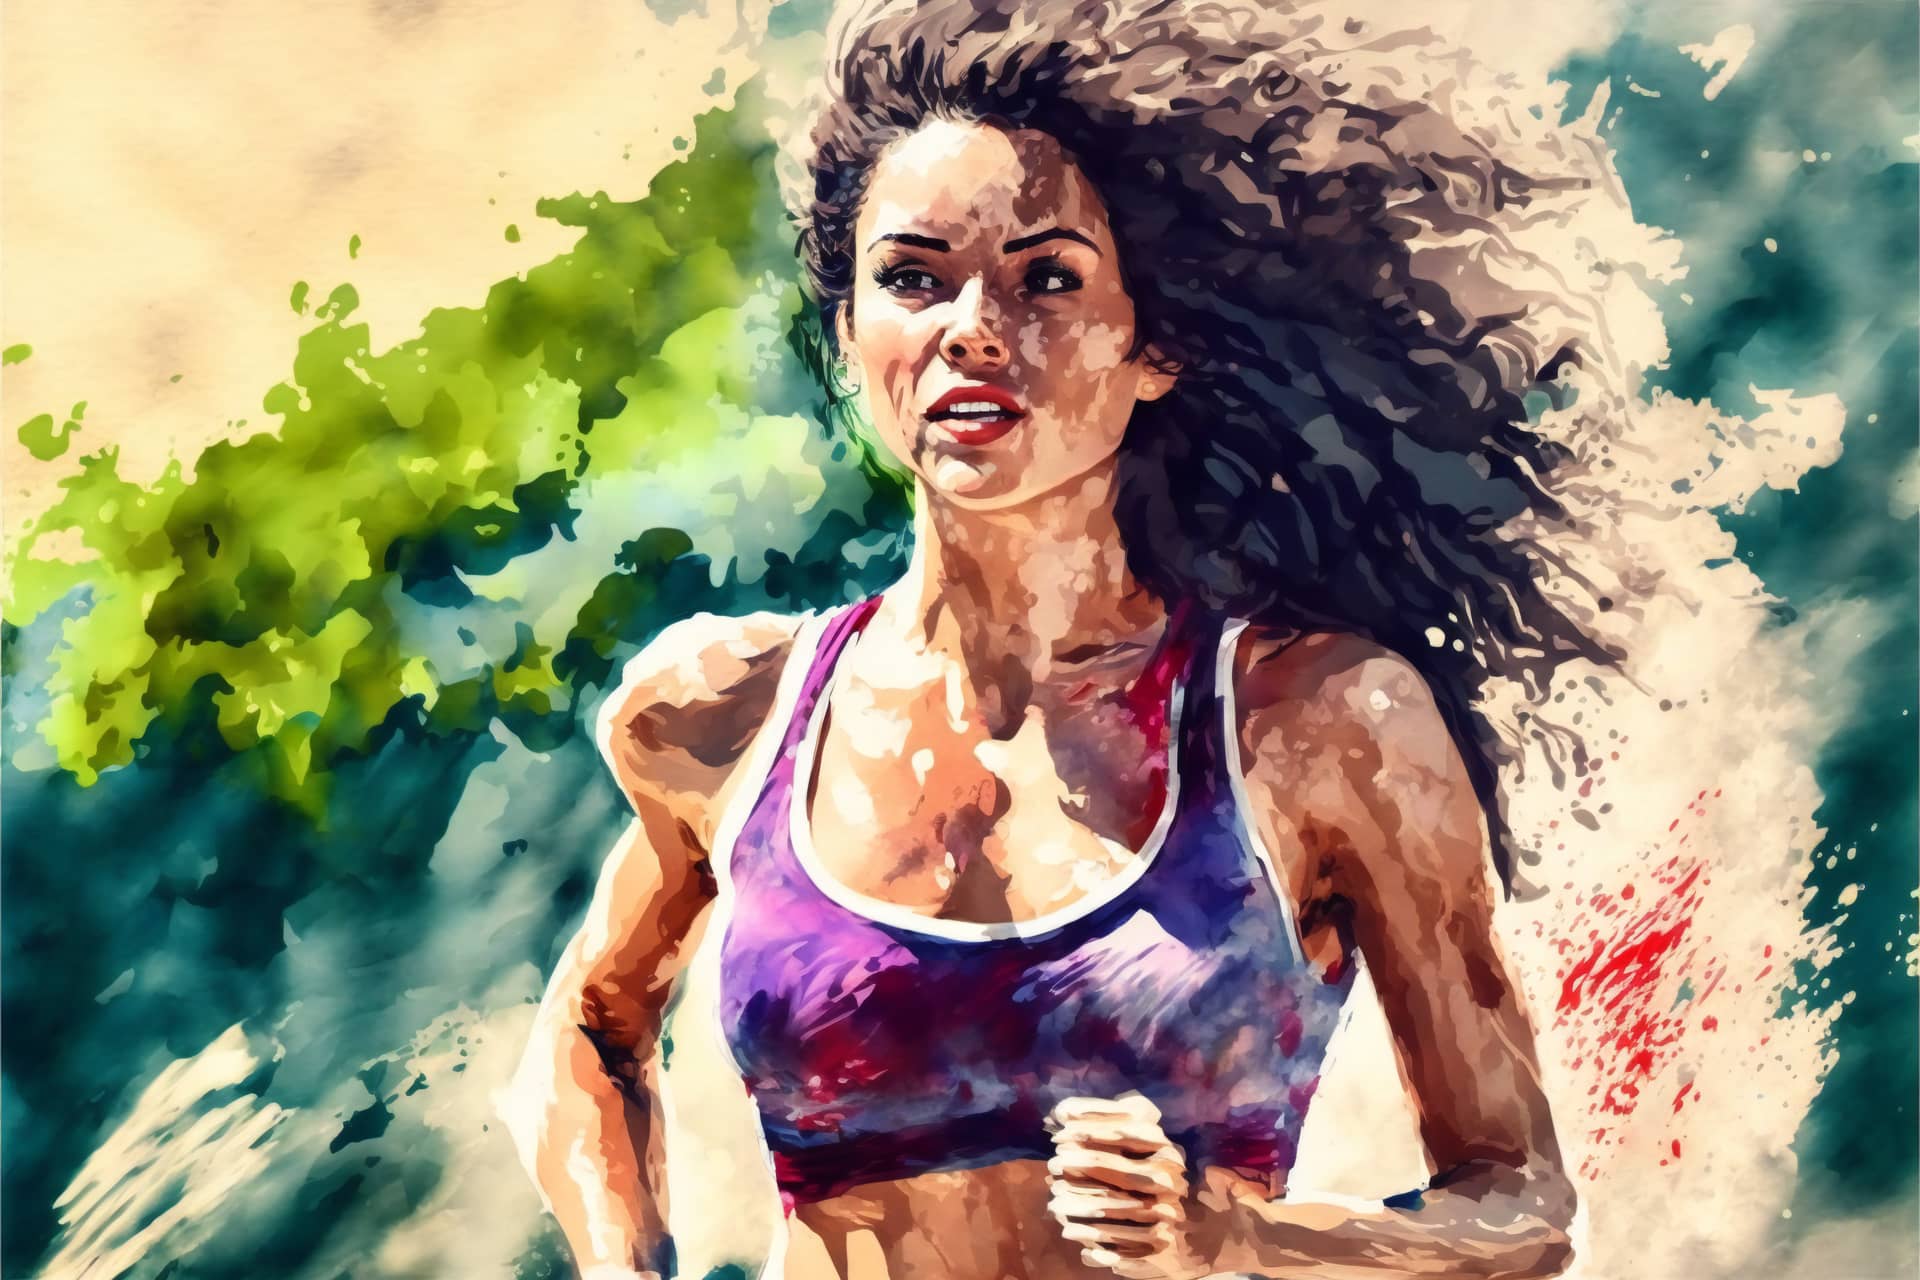 Fitness girl watercolor painting style creative digital illustration painting